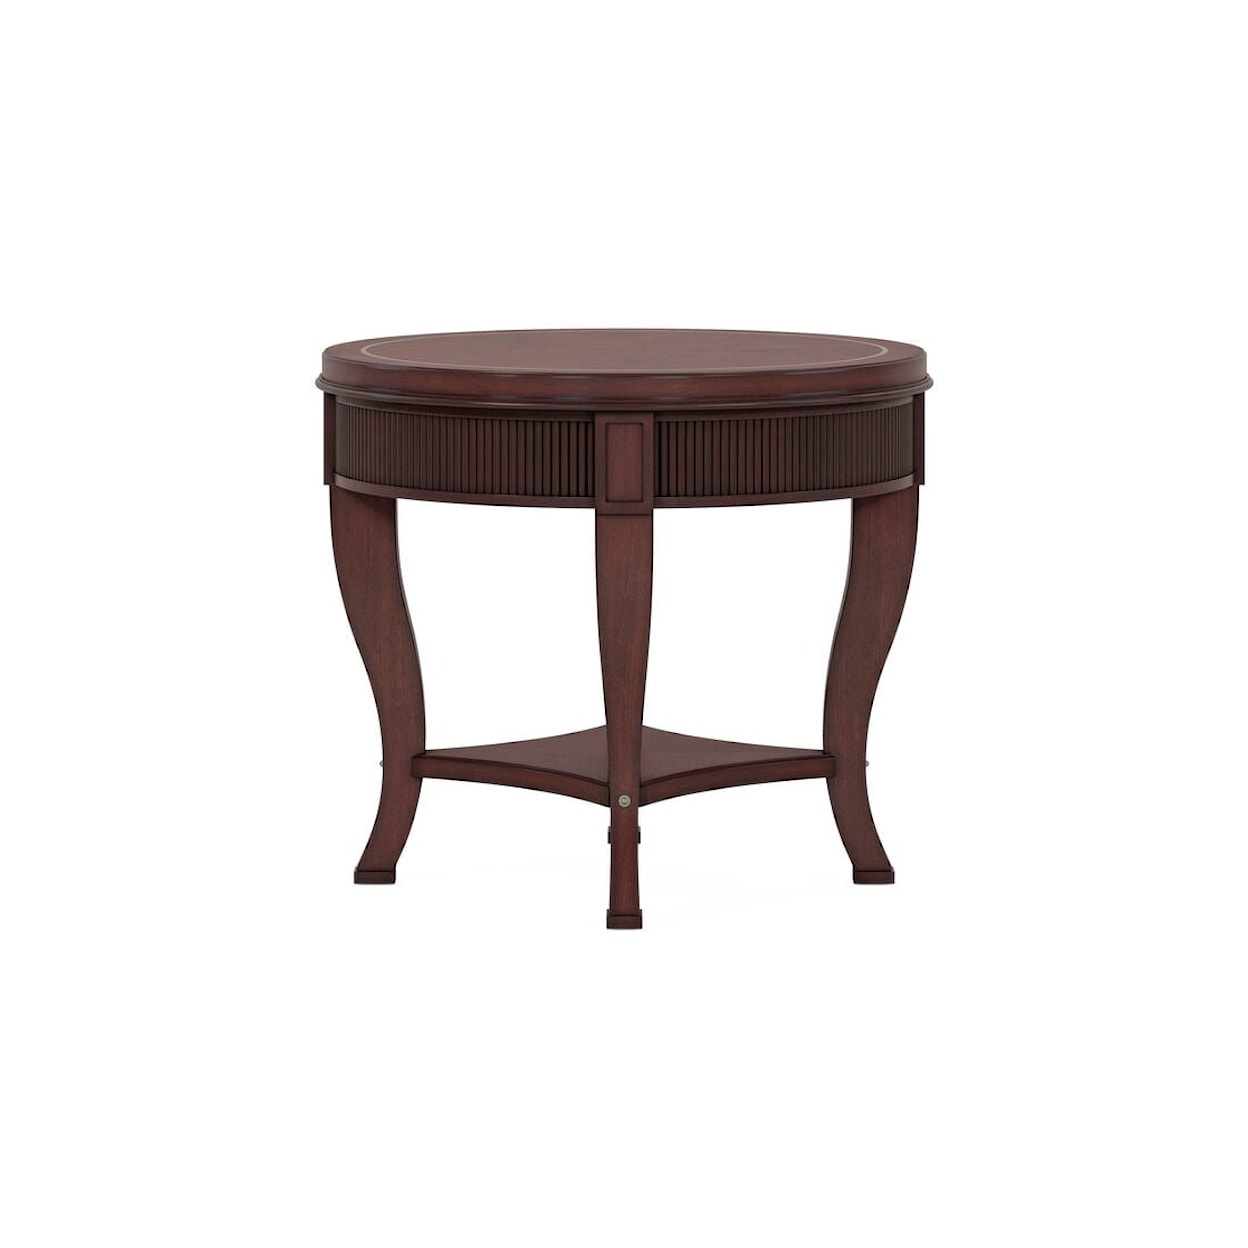 A.R.T. Furniture Inc 328 - Revival Round End Table